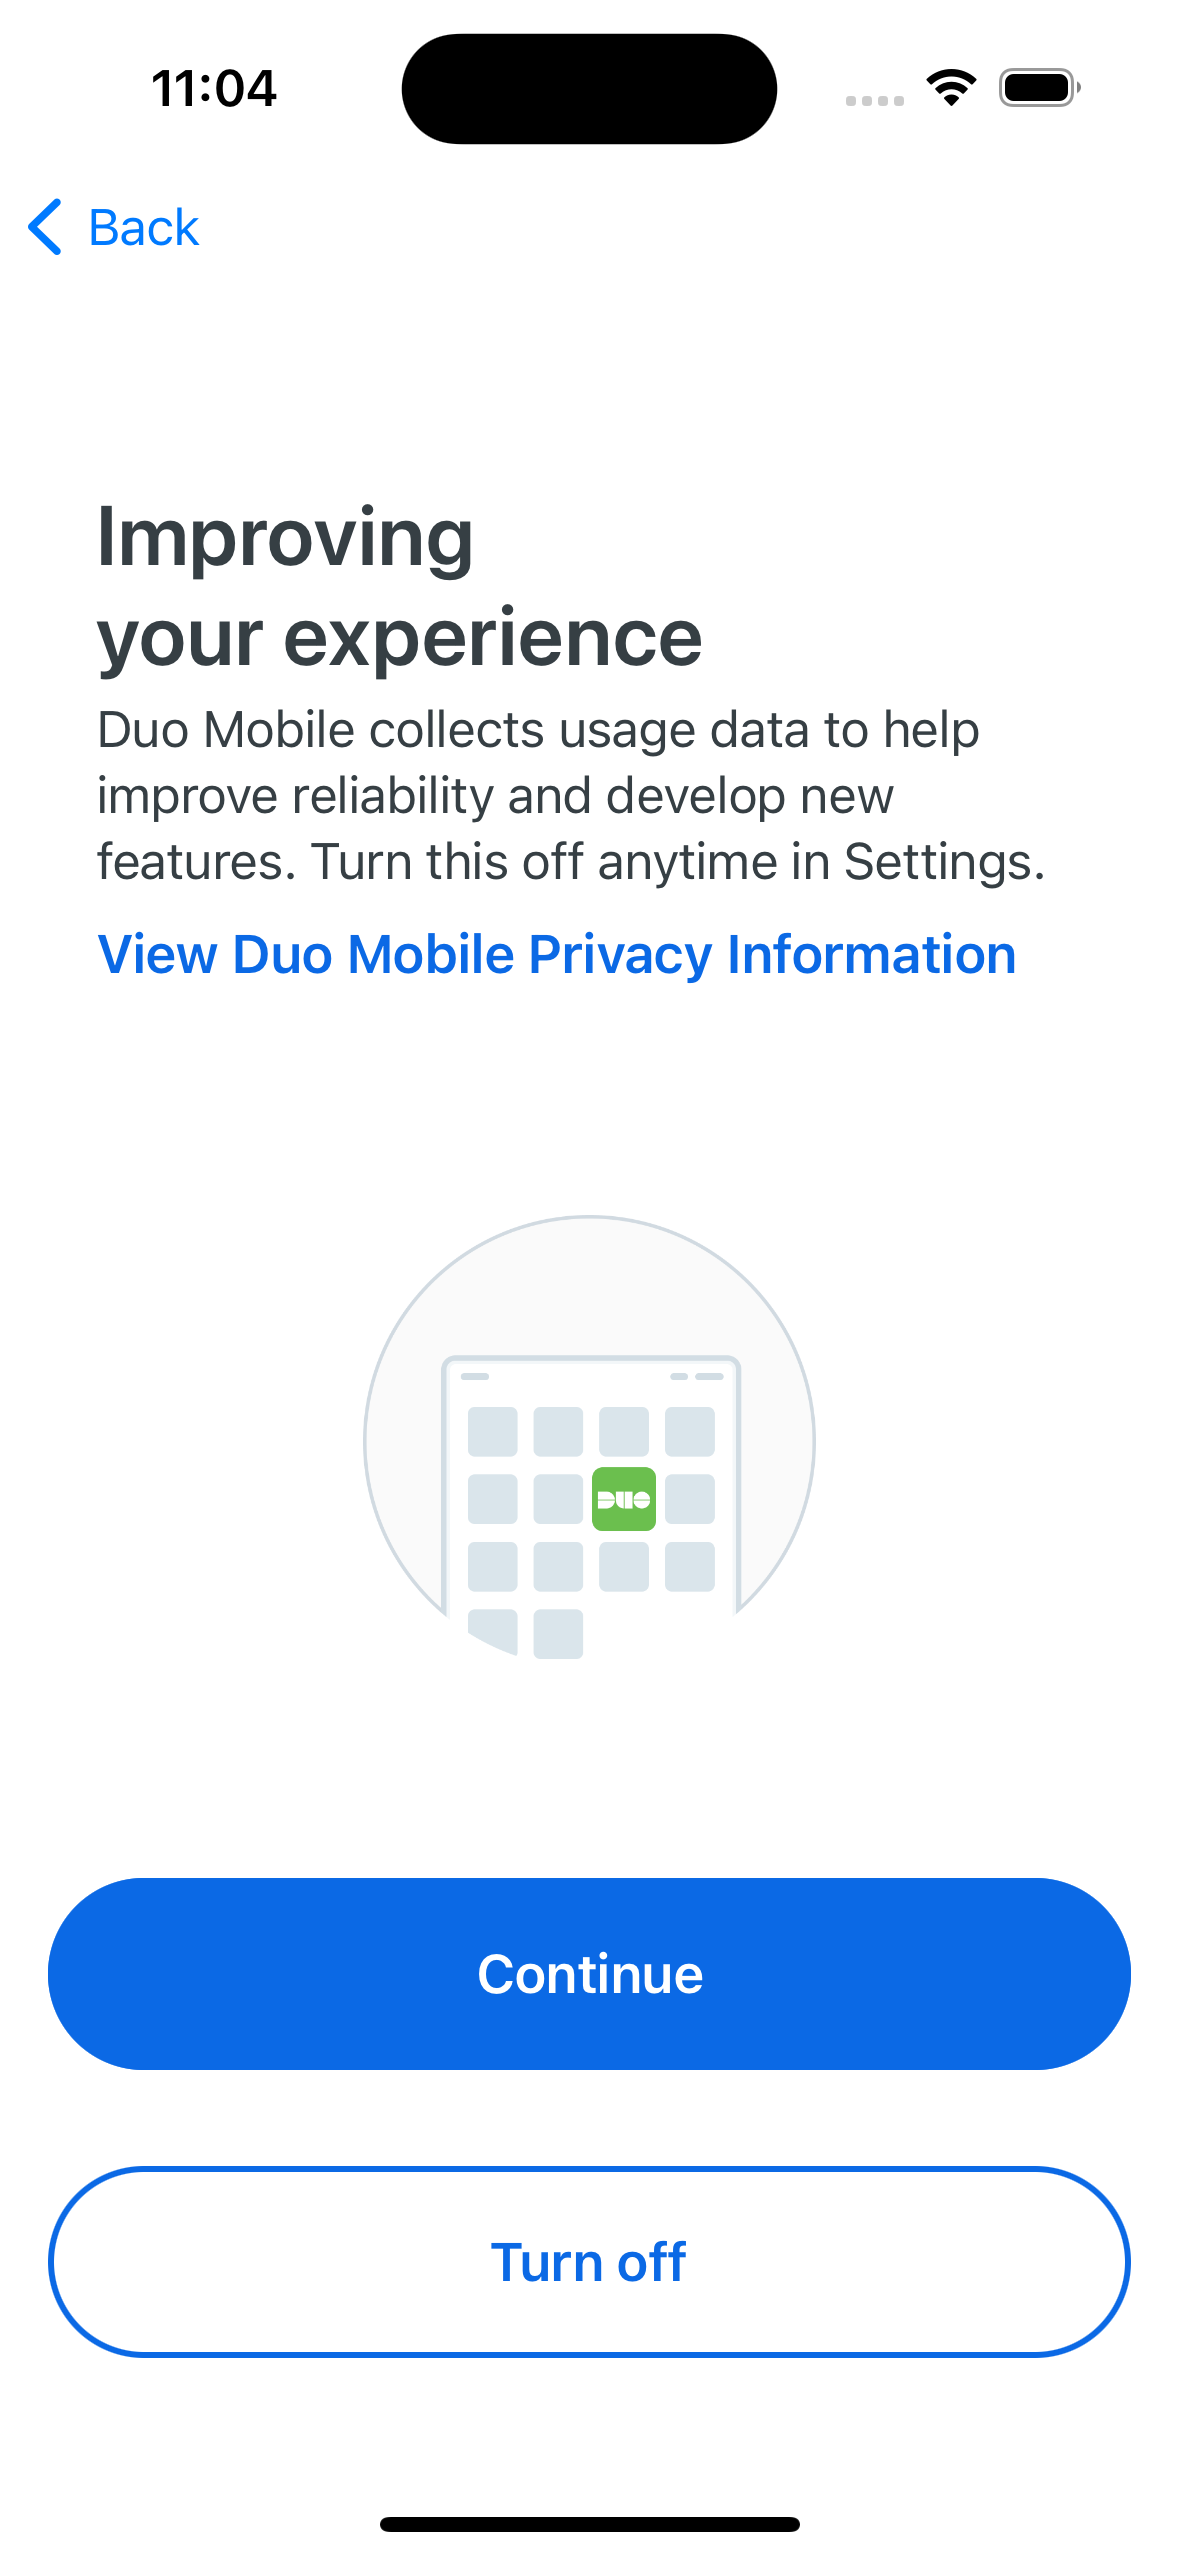 Allow Duo Mobile to Collect Usage Data